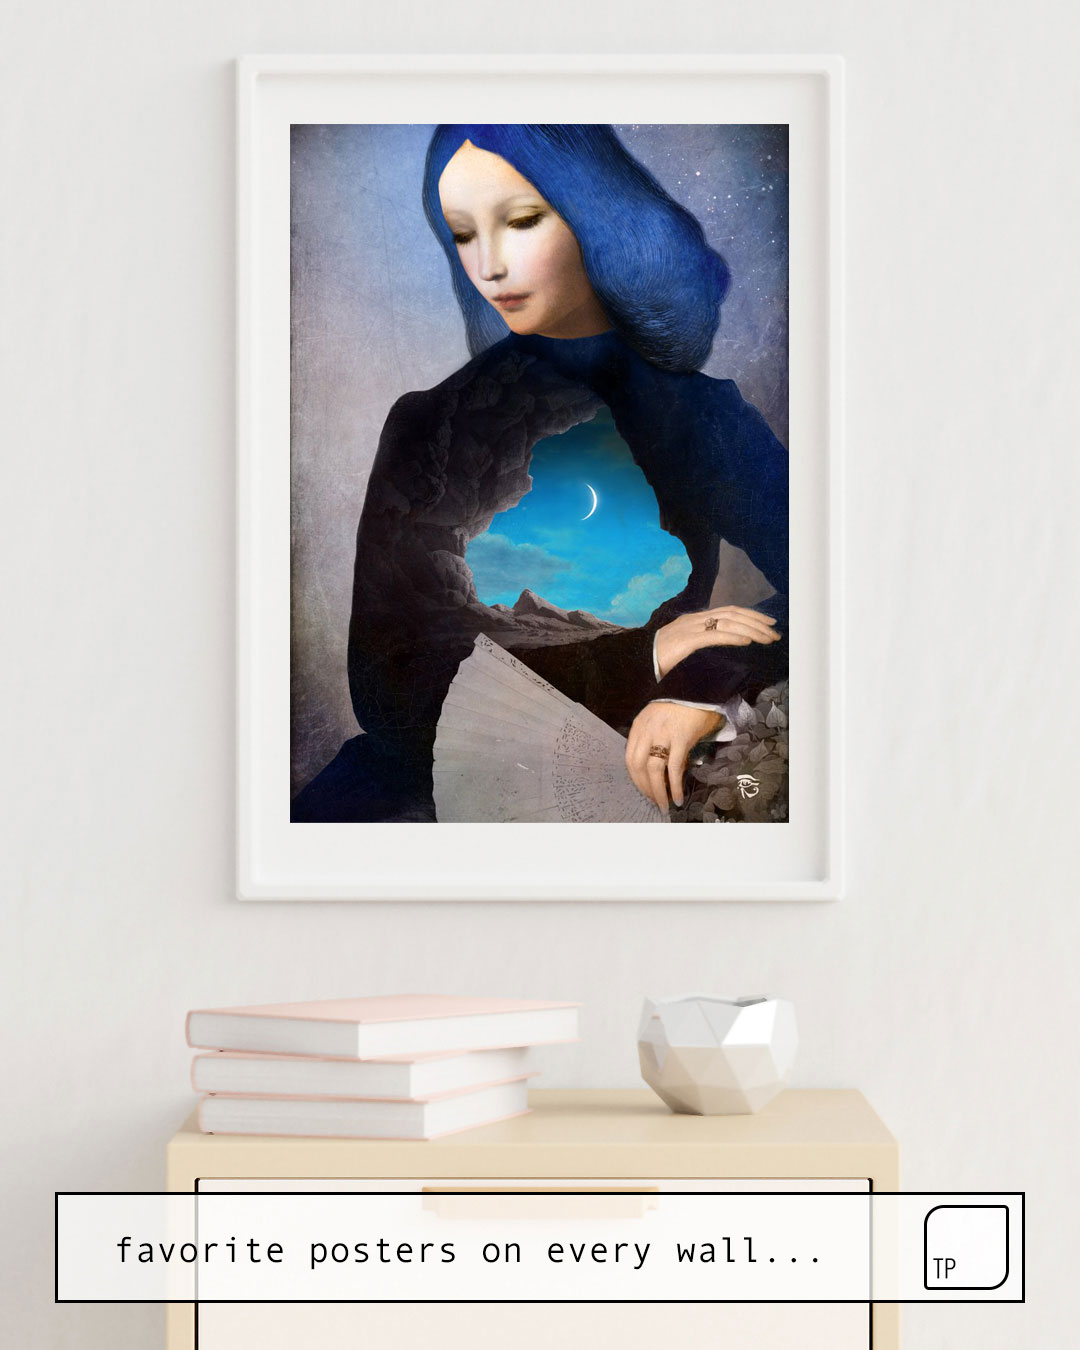 The photo shows an example of furnishing with the motif LADY MIDNIGHT by Christian Schloe as mural